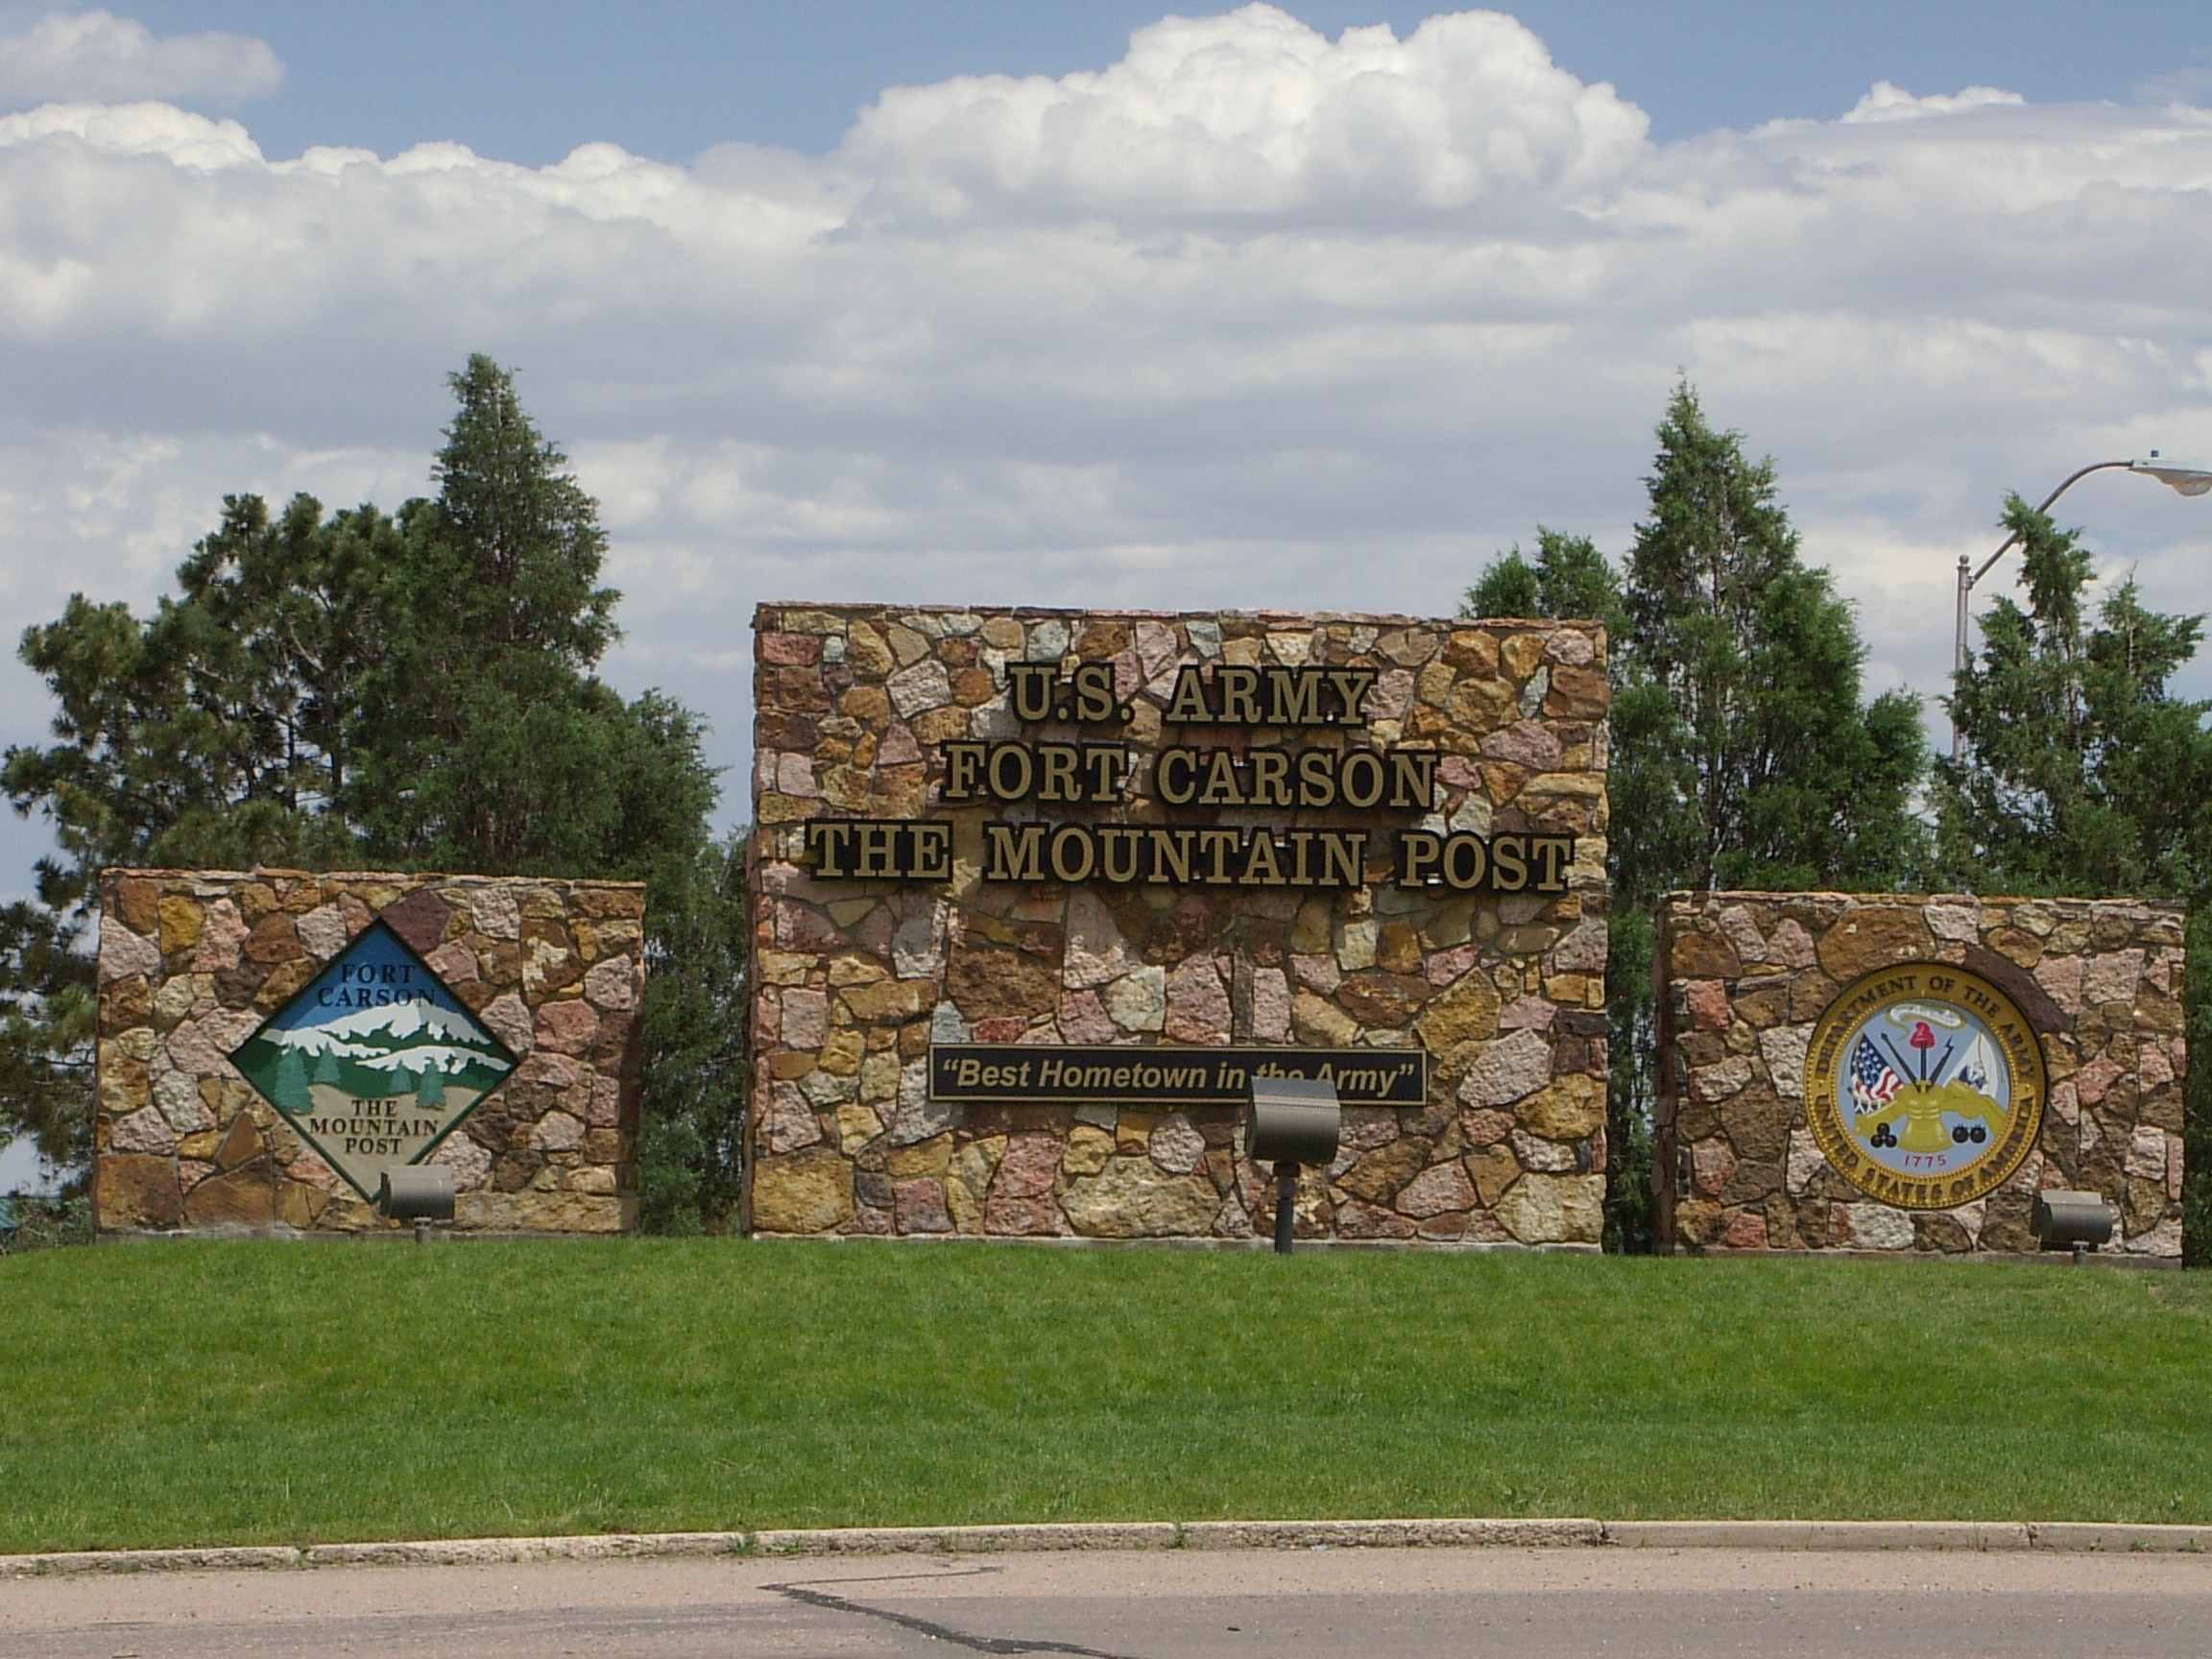 fort carson map gate 6